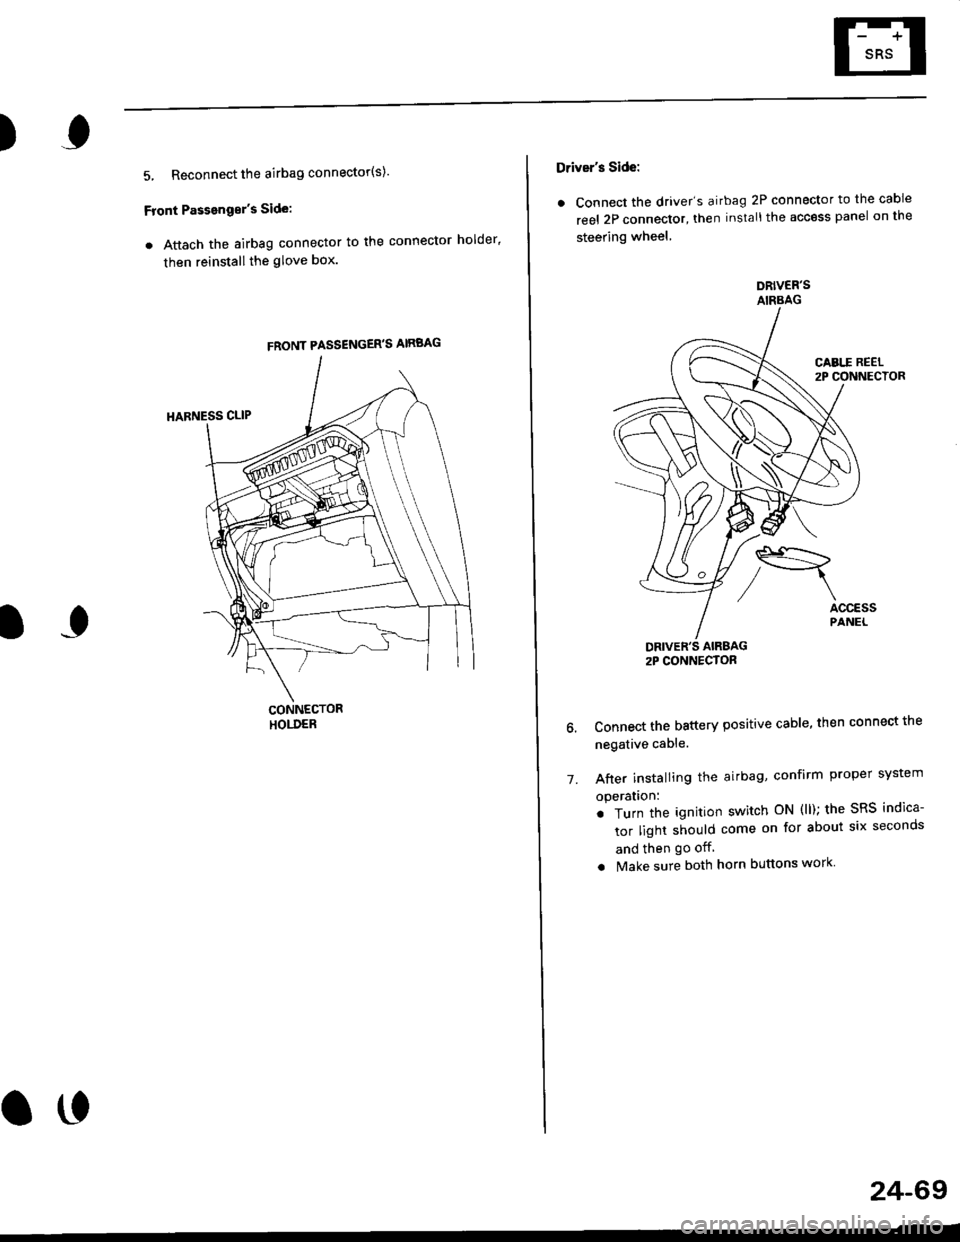 HONDA CIVIC 2000 6.G Workshop Manual )
5, Reconnect the airbag connector(s)
Front Passengors Side:
a Attach the airbag connector to the connector holder
then reinstallthe glove box.
FRONT PASSENGERS AIRBAG
oo
24-69
Drivers Side:
a C